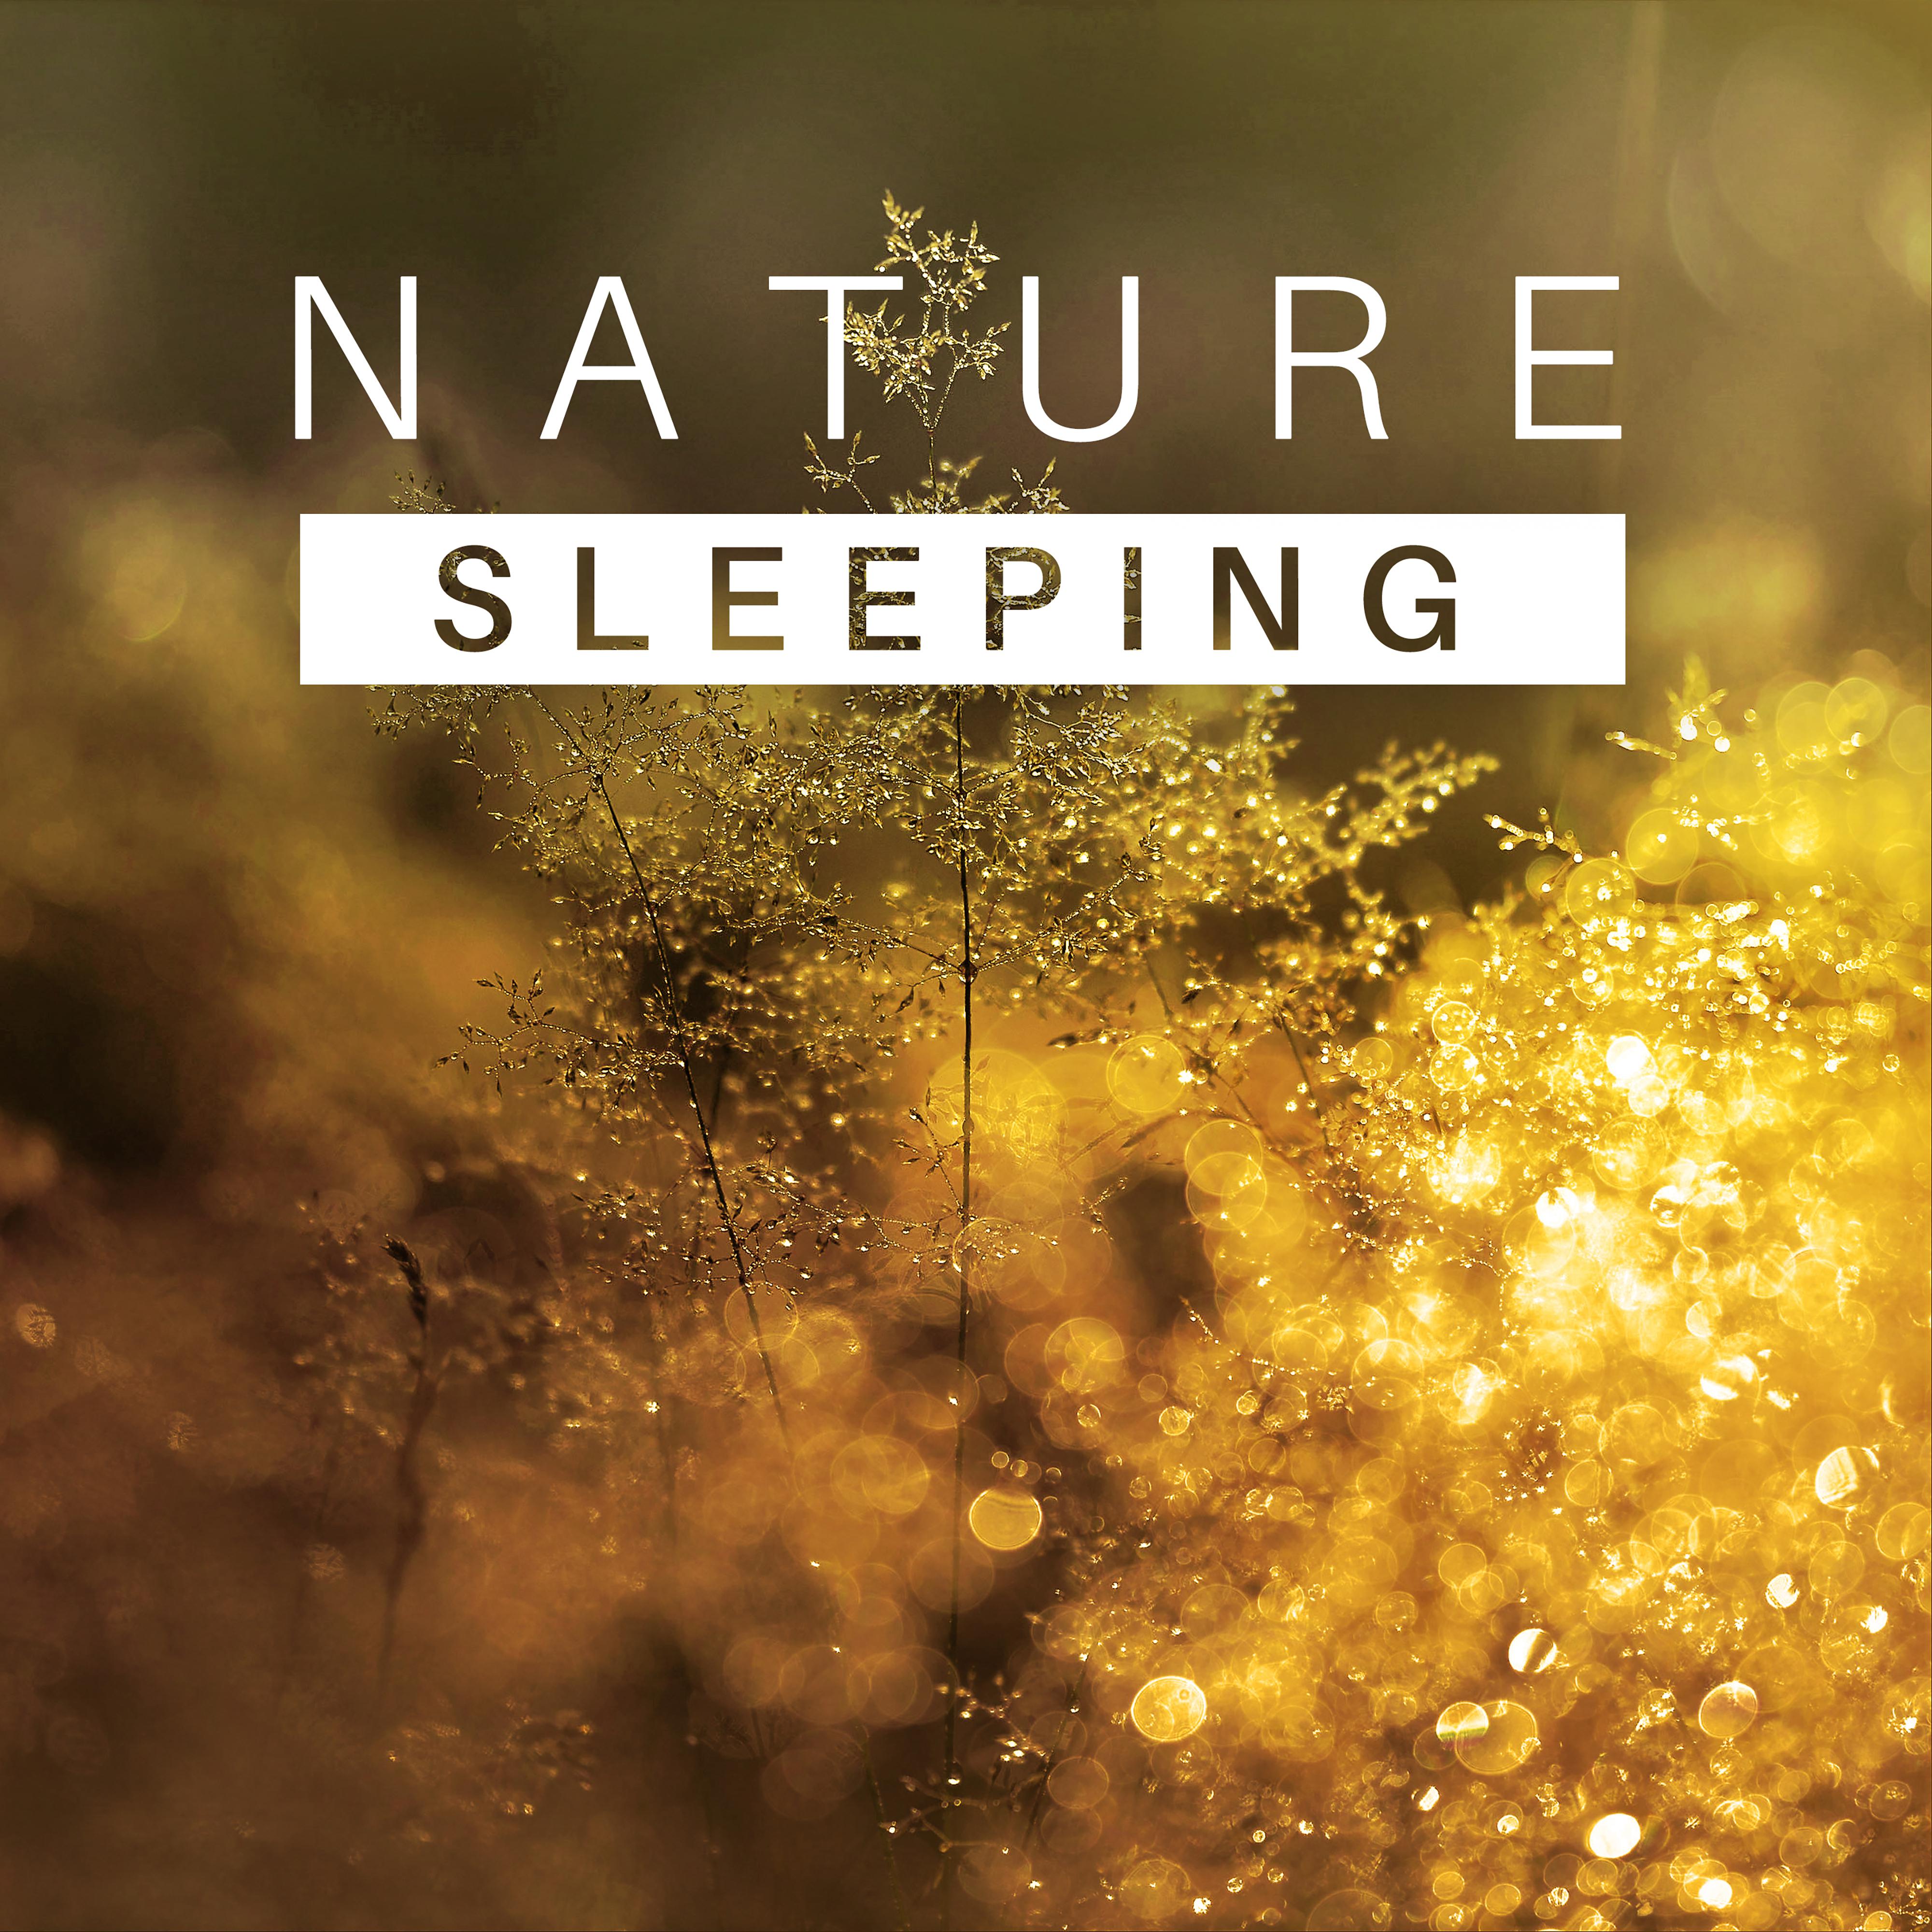 Sleeping Nature – Healing Music for Relaxation, Stress Relief, Sounds of Water, Singing Birds, Nature Sounds to Calm Down, Pure Mind